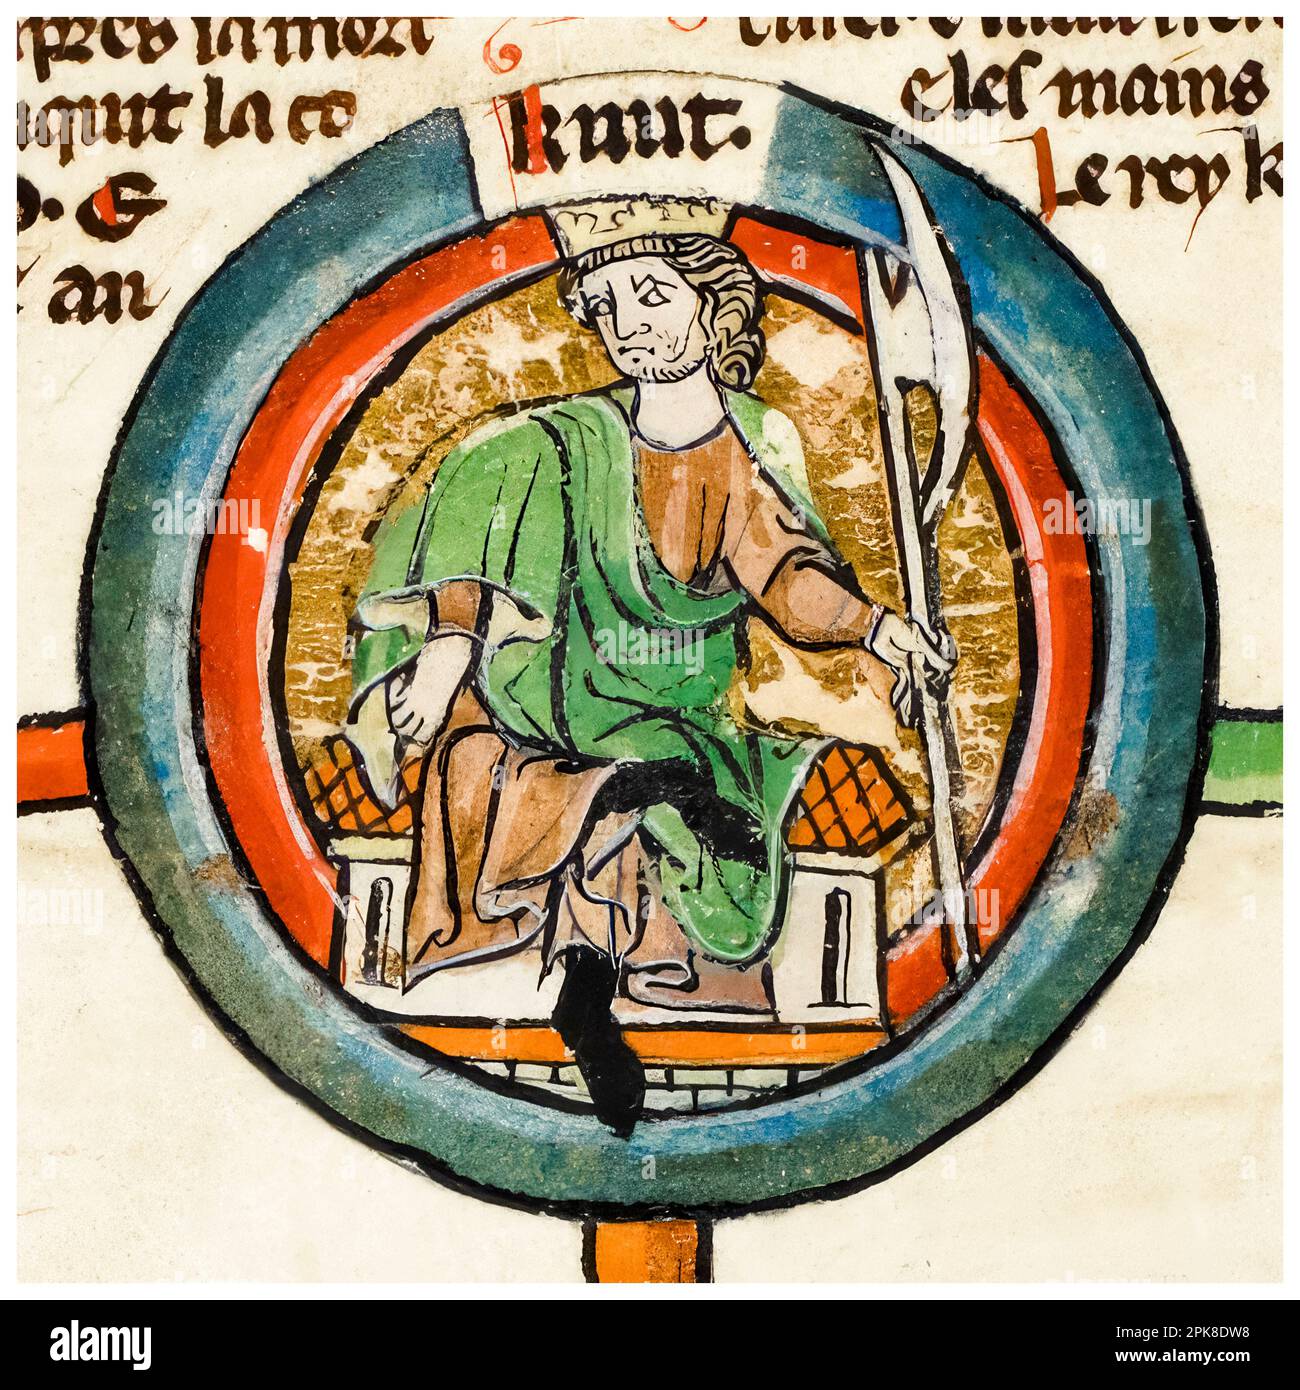 On this day in 1016: Canute the Great – Viking king of England